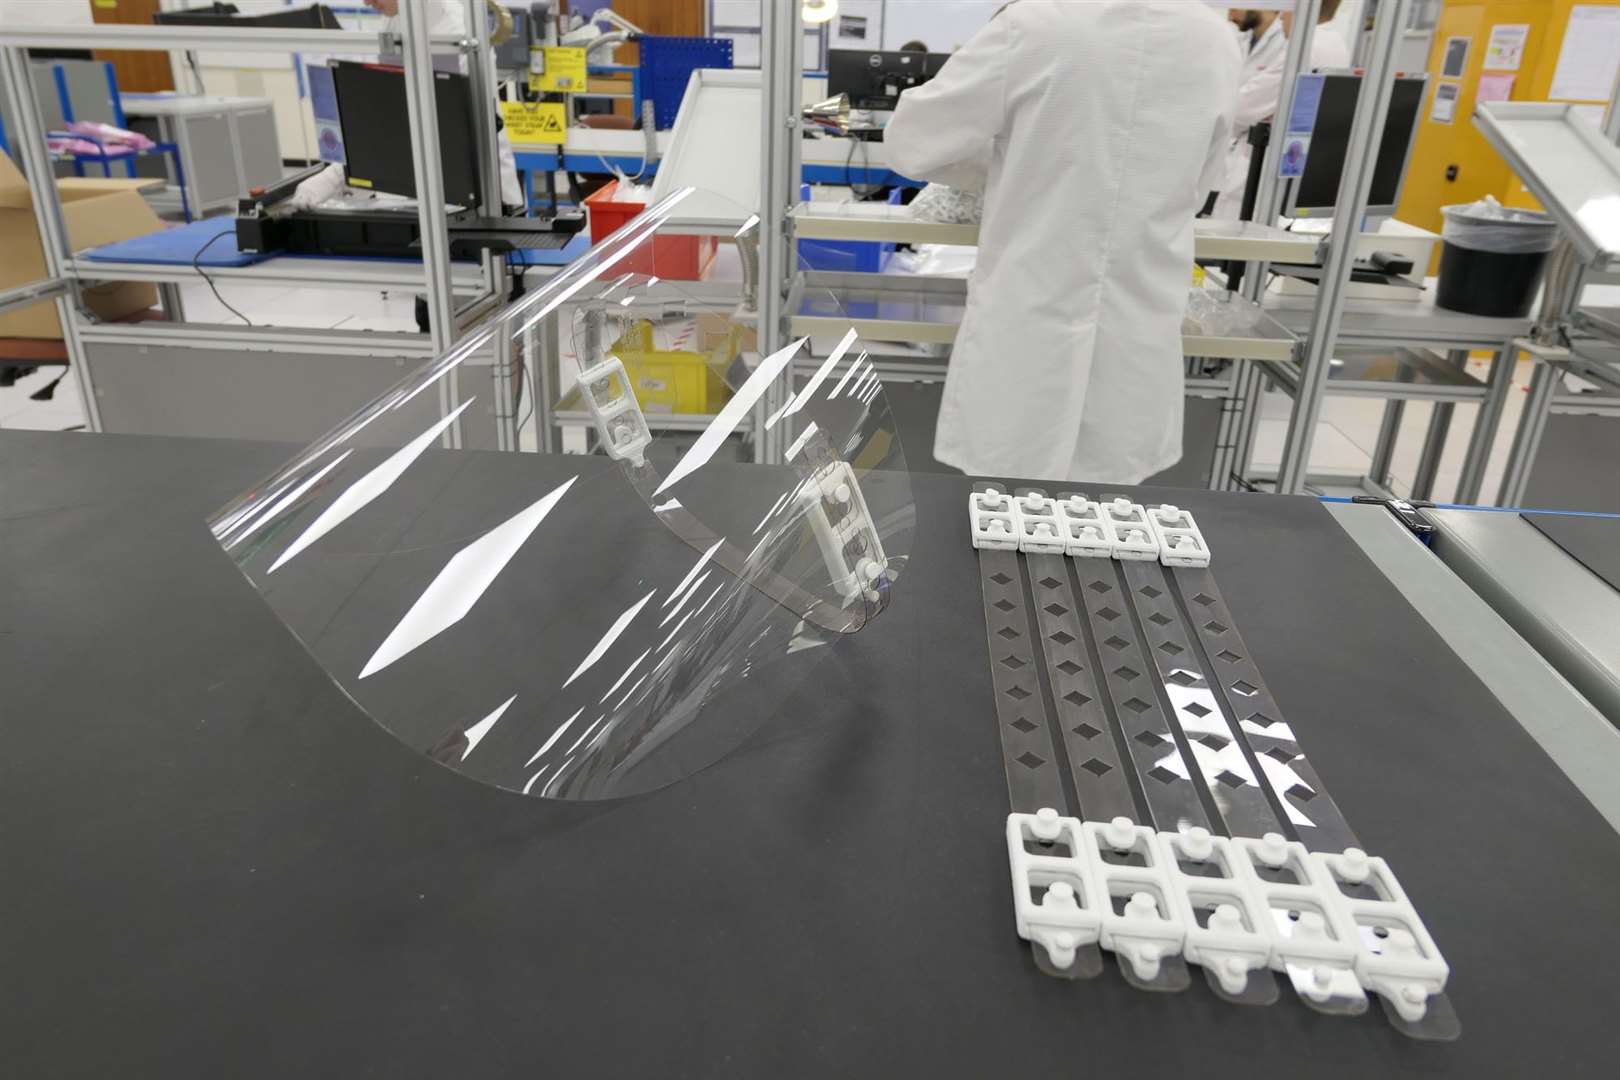 BAE Systems has shipped the face shields to healthcare providers across the South East (37238596)